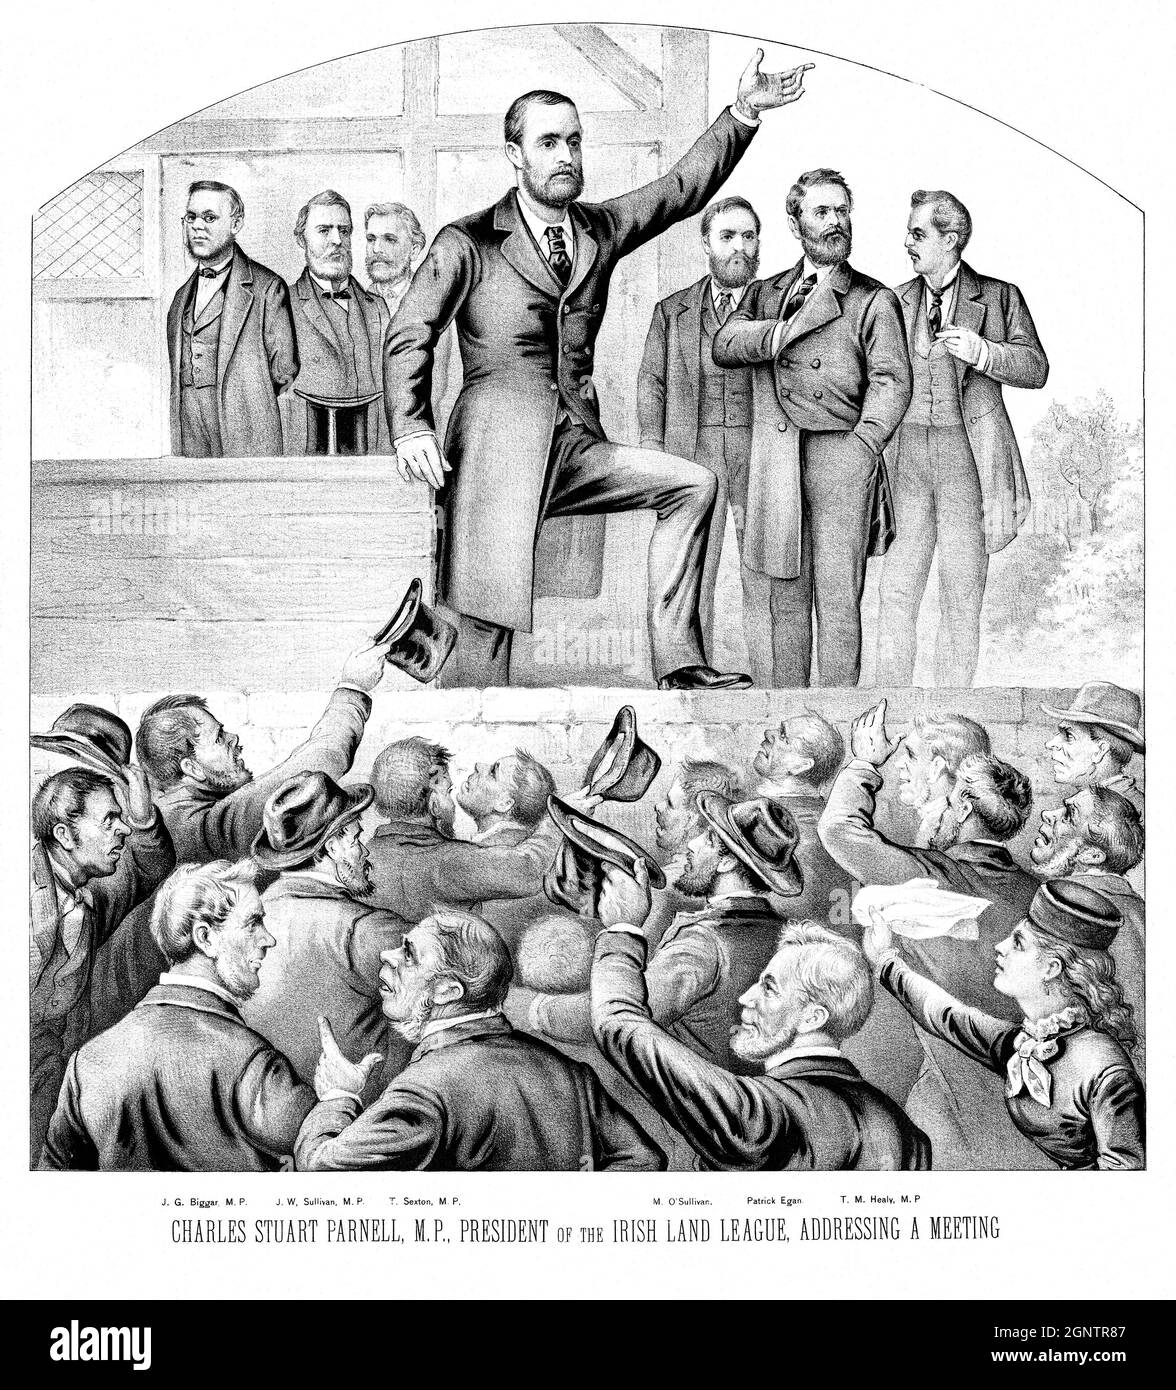 Charles Stewart Parnell (1846-1891),  an Irish nationalist politician who served as a Member of Parliament (MP) from 1875 to 1891 and Leader of the Home Rule League from 1880 to 1882 addressing a meeting. Stock Photo